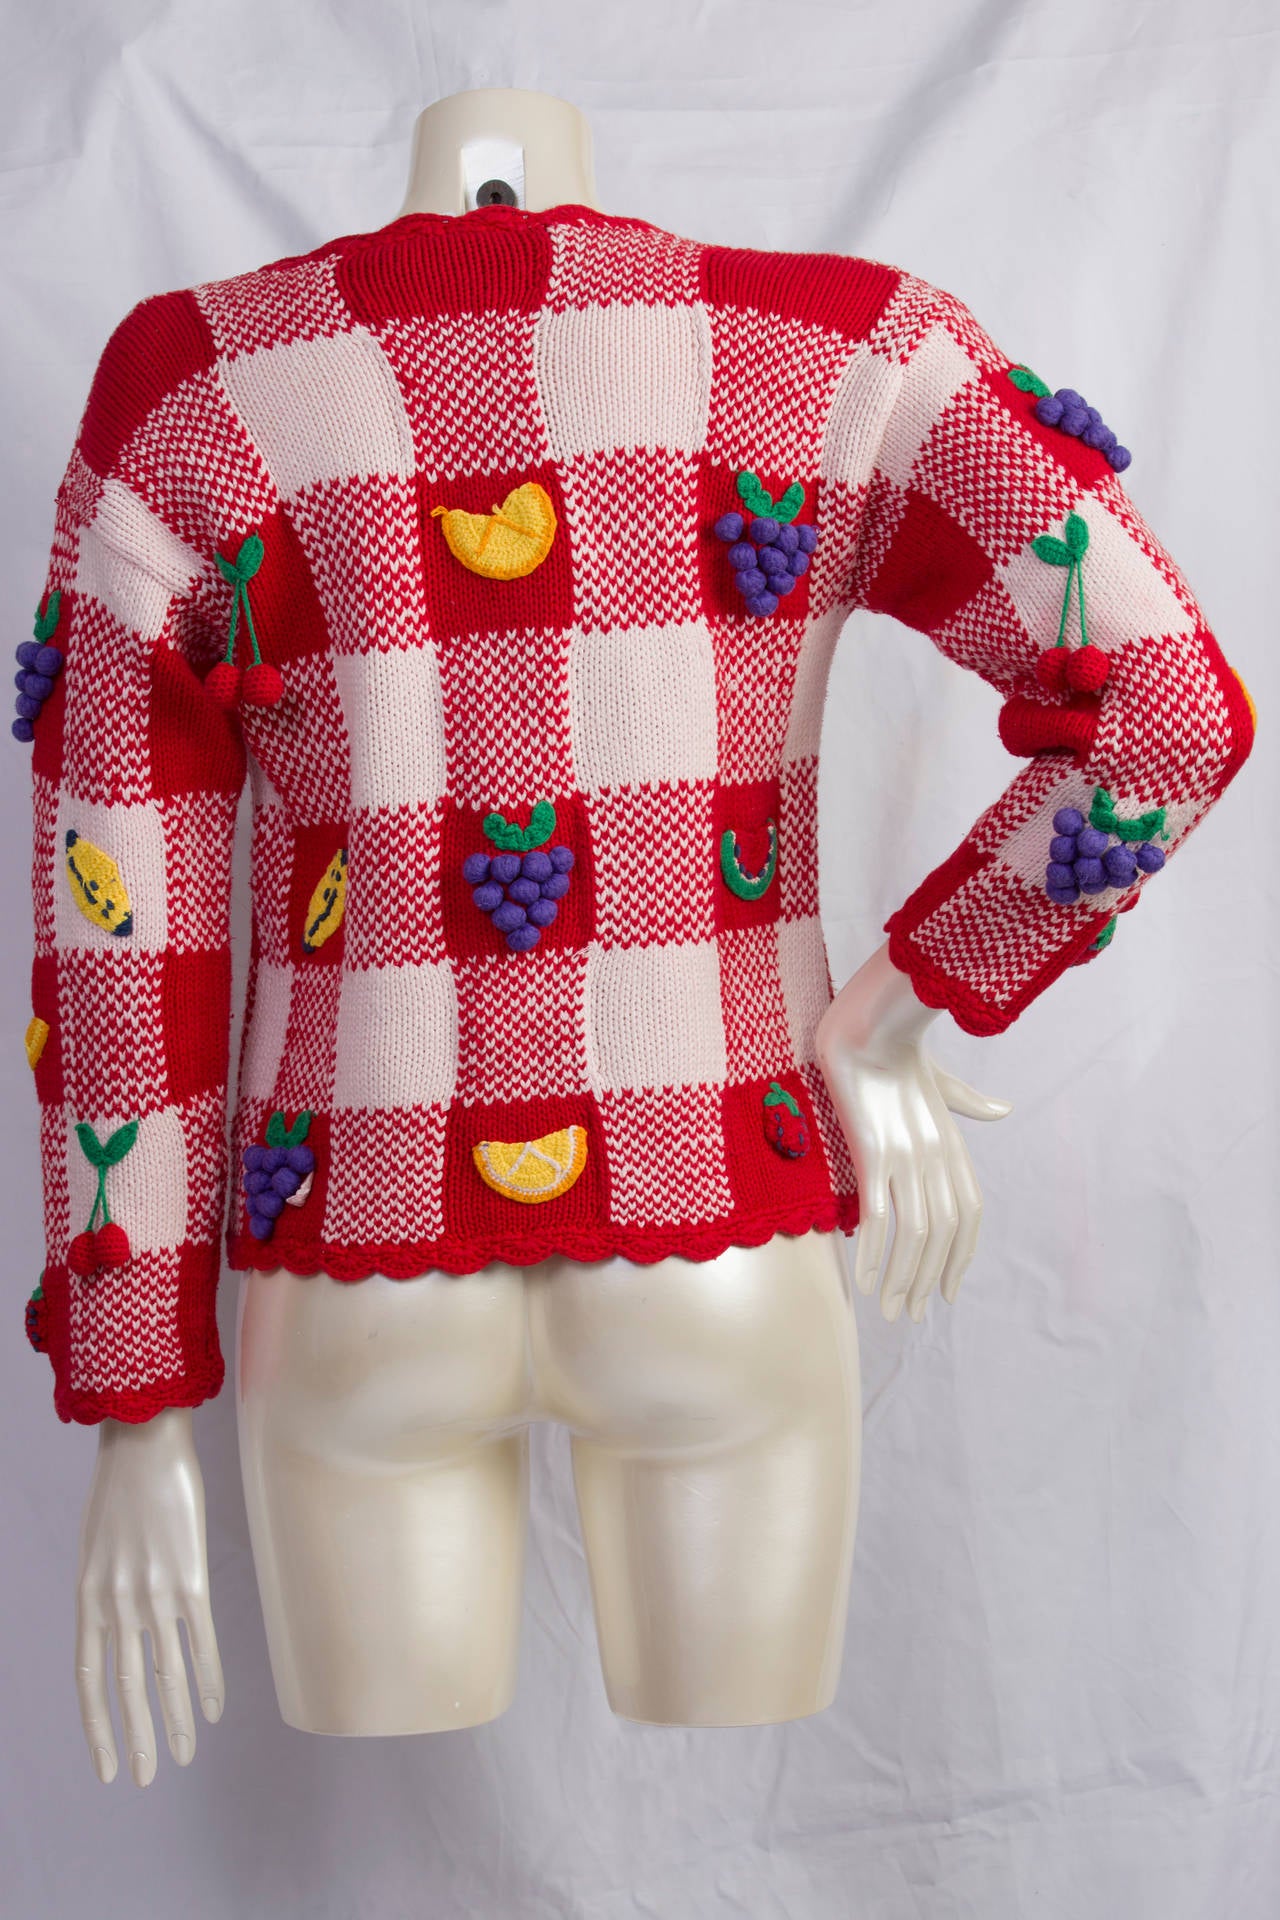 1980s Moschino Cheap and Chic Fruits Knitwear